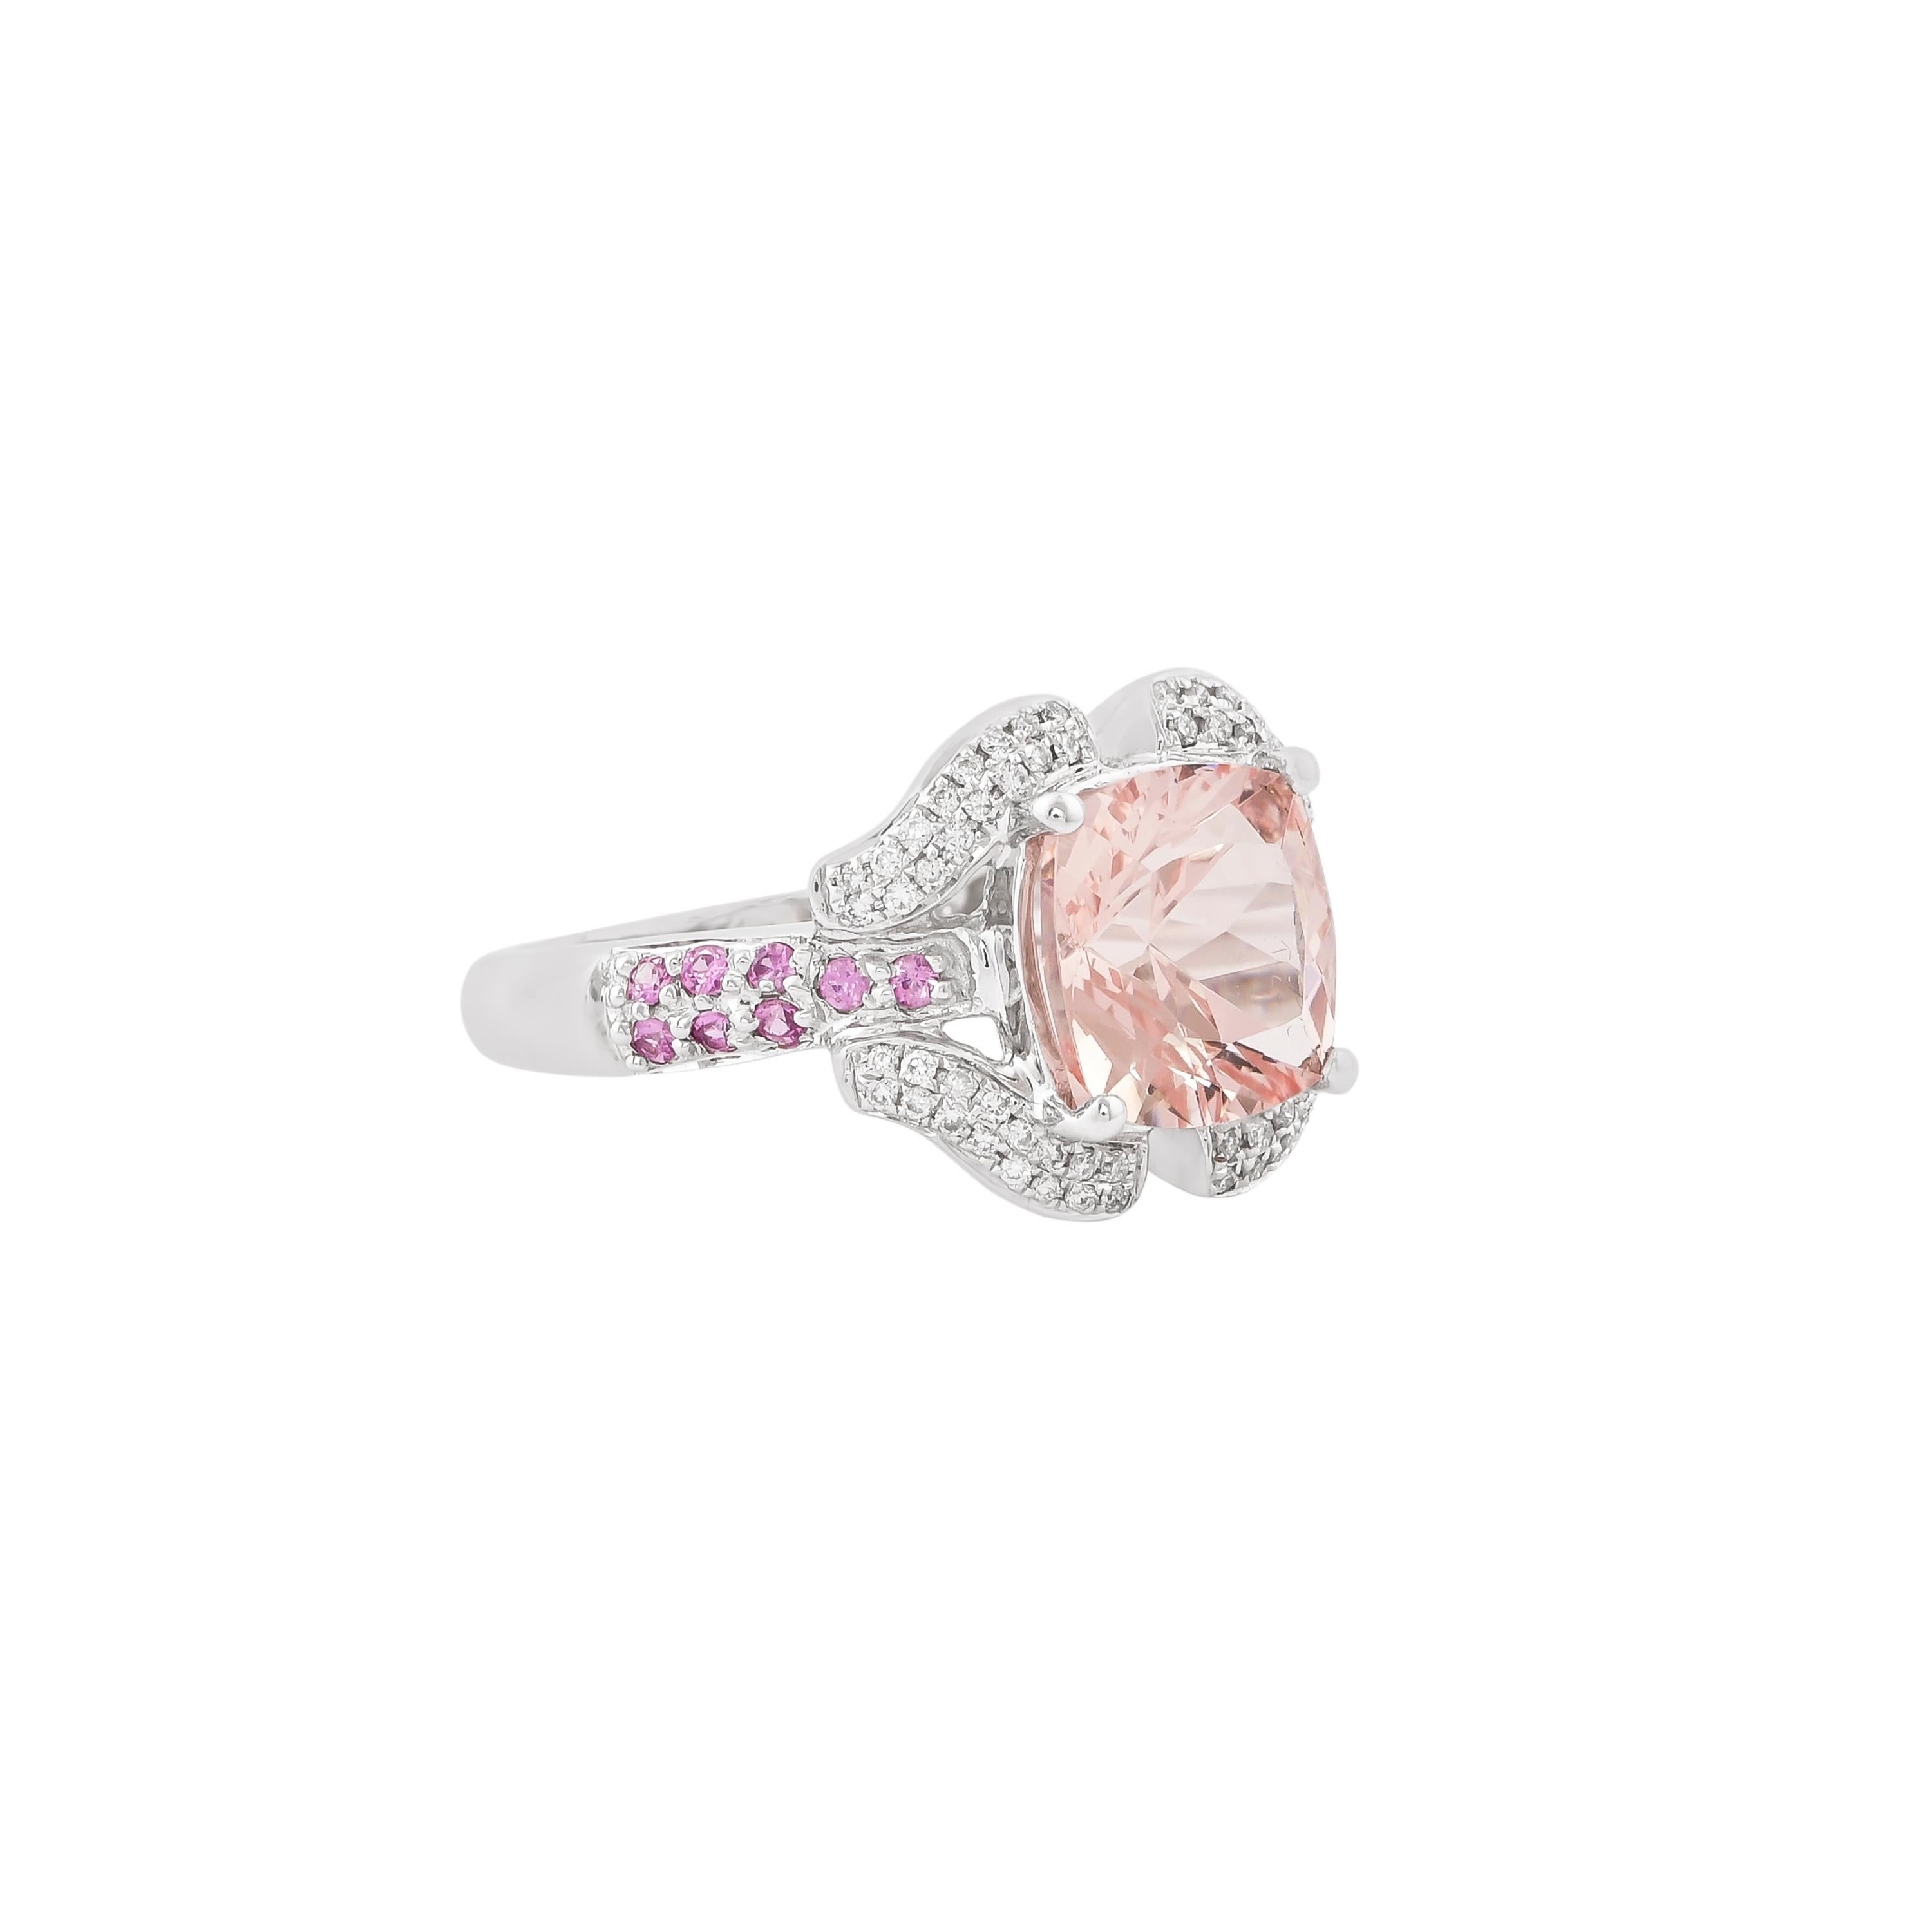 This collection features an array of magnificent morganites! Accented with diamonds these rings are made in white gold and present a classic yet elegant look. The vibrant addition of Pink Sapphire perfectly assists the peachy hue of the morganite.